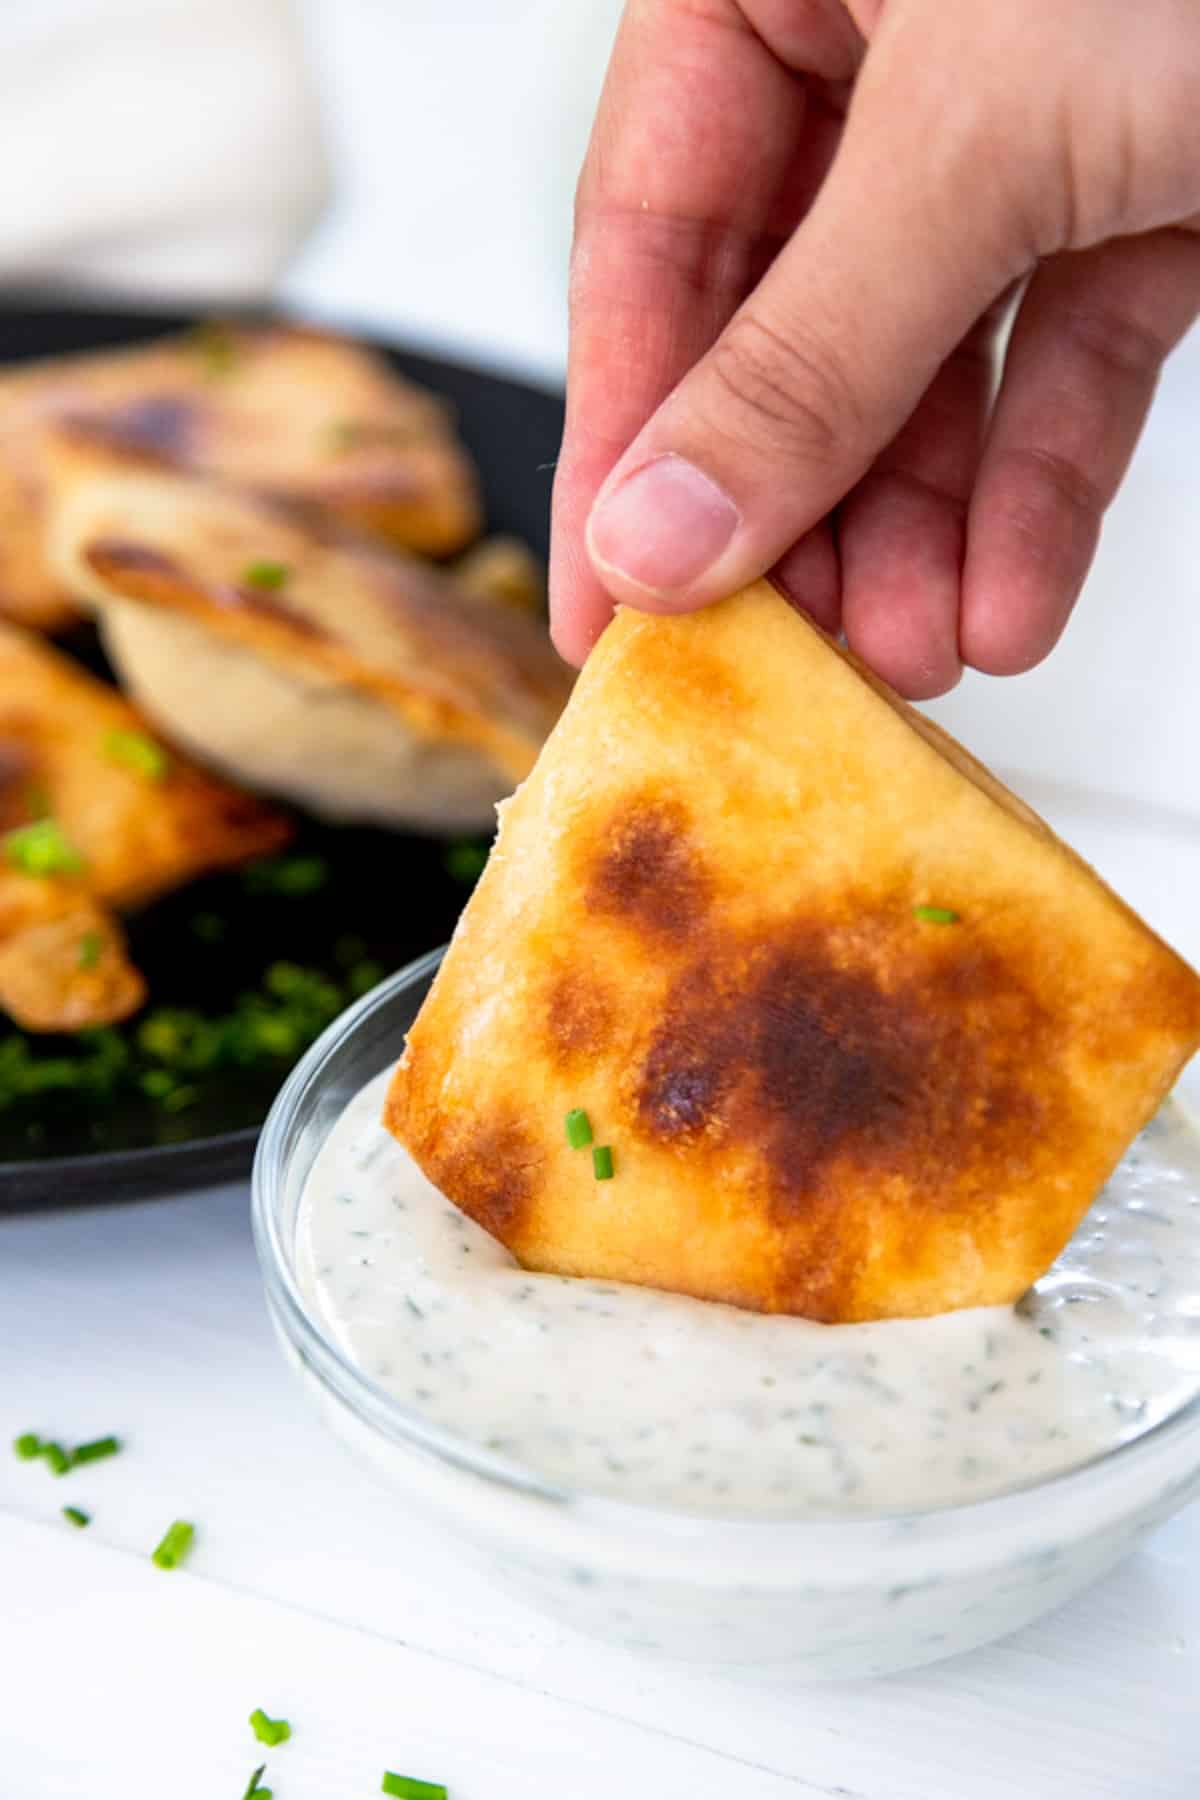 A hand dipping a mini calzone into a bowl of ranch dressing.